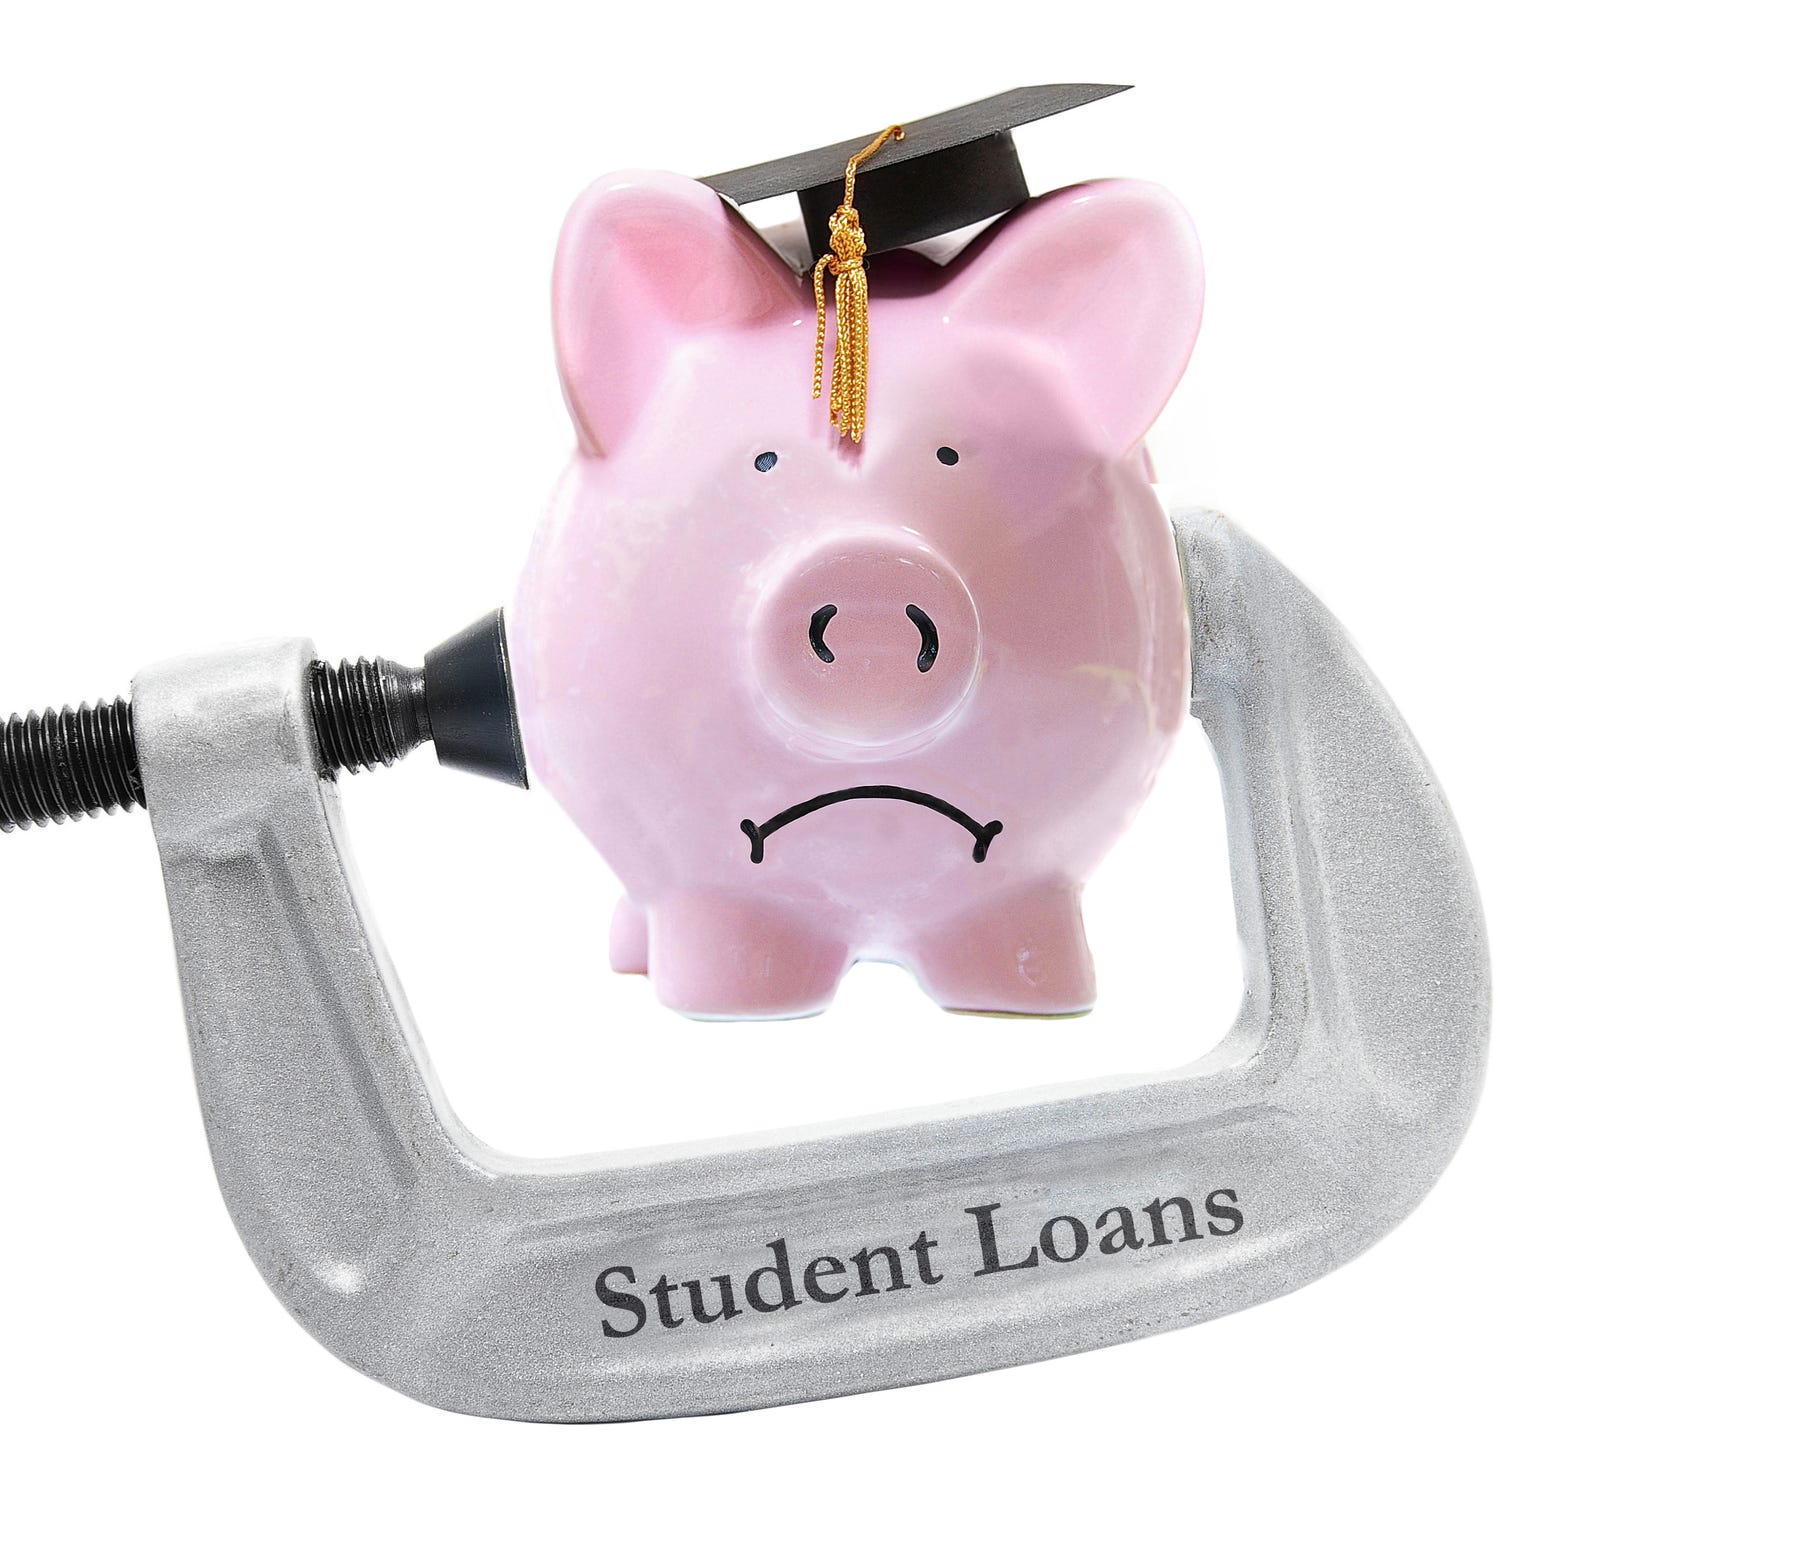 There are a handful of legitimate ways you can make your student loan payments more affordable, but it's very likely you'll come across student loan scams if you're researching repayment options.